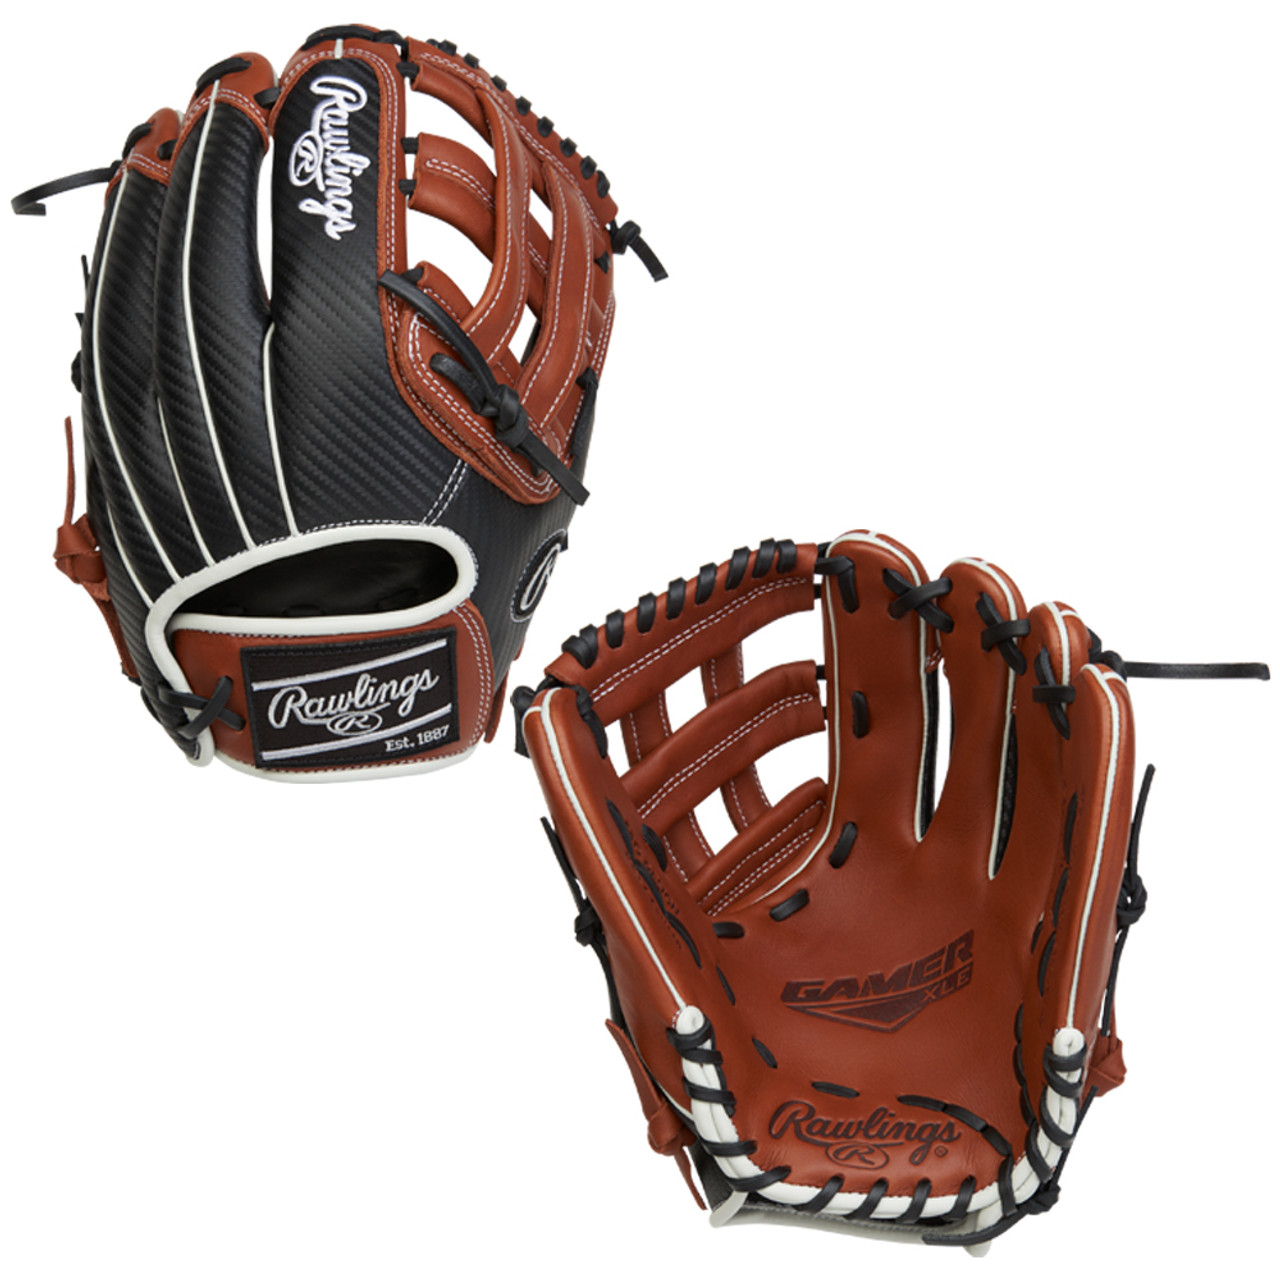 Free Images : baseball glove, sports gear, grass, personal protective  equipment, lawn, baseball equipment, ball game, baseball protective gear,  fashion accessory, team sport 5184x3006 - - 1558723 - Free stock photos -  PxHere